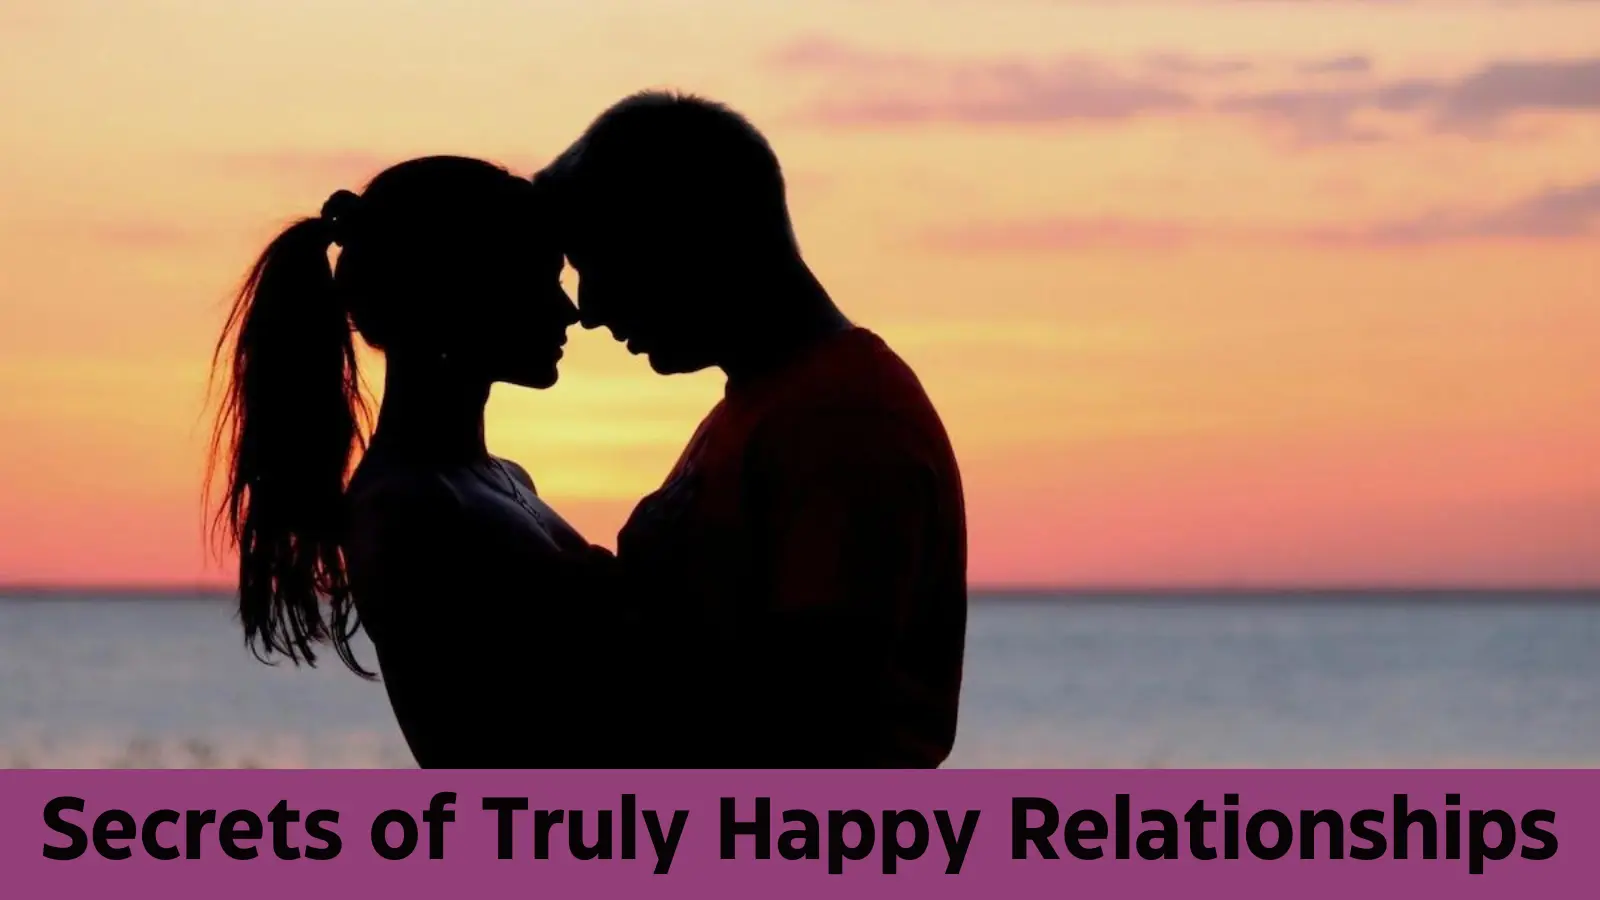 20 Secrets of Truly Happy Relationships